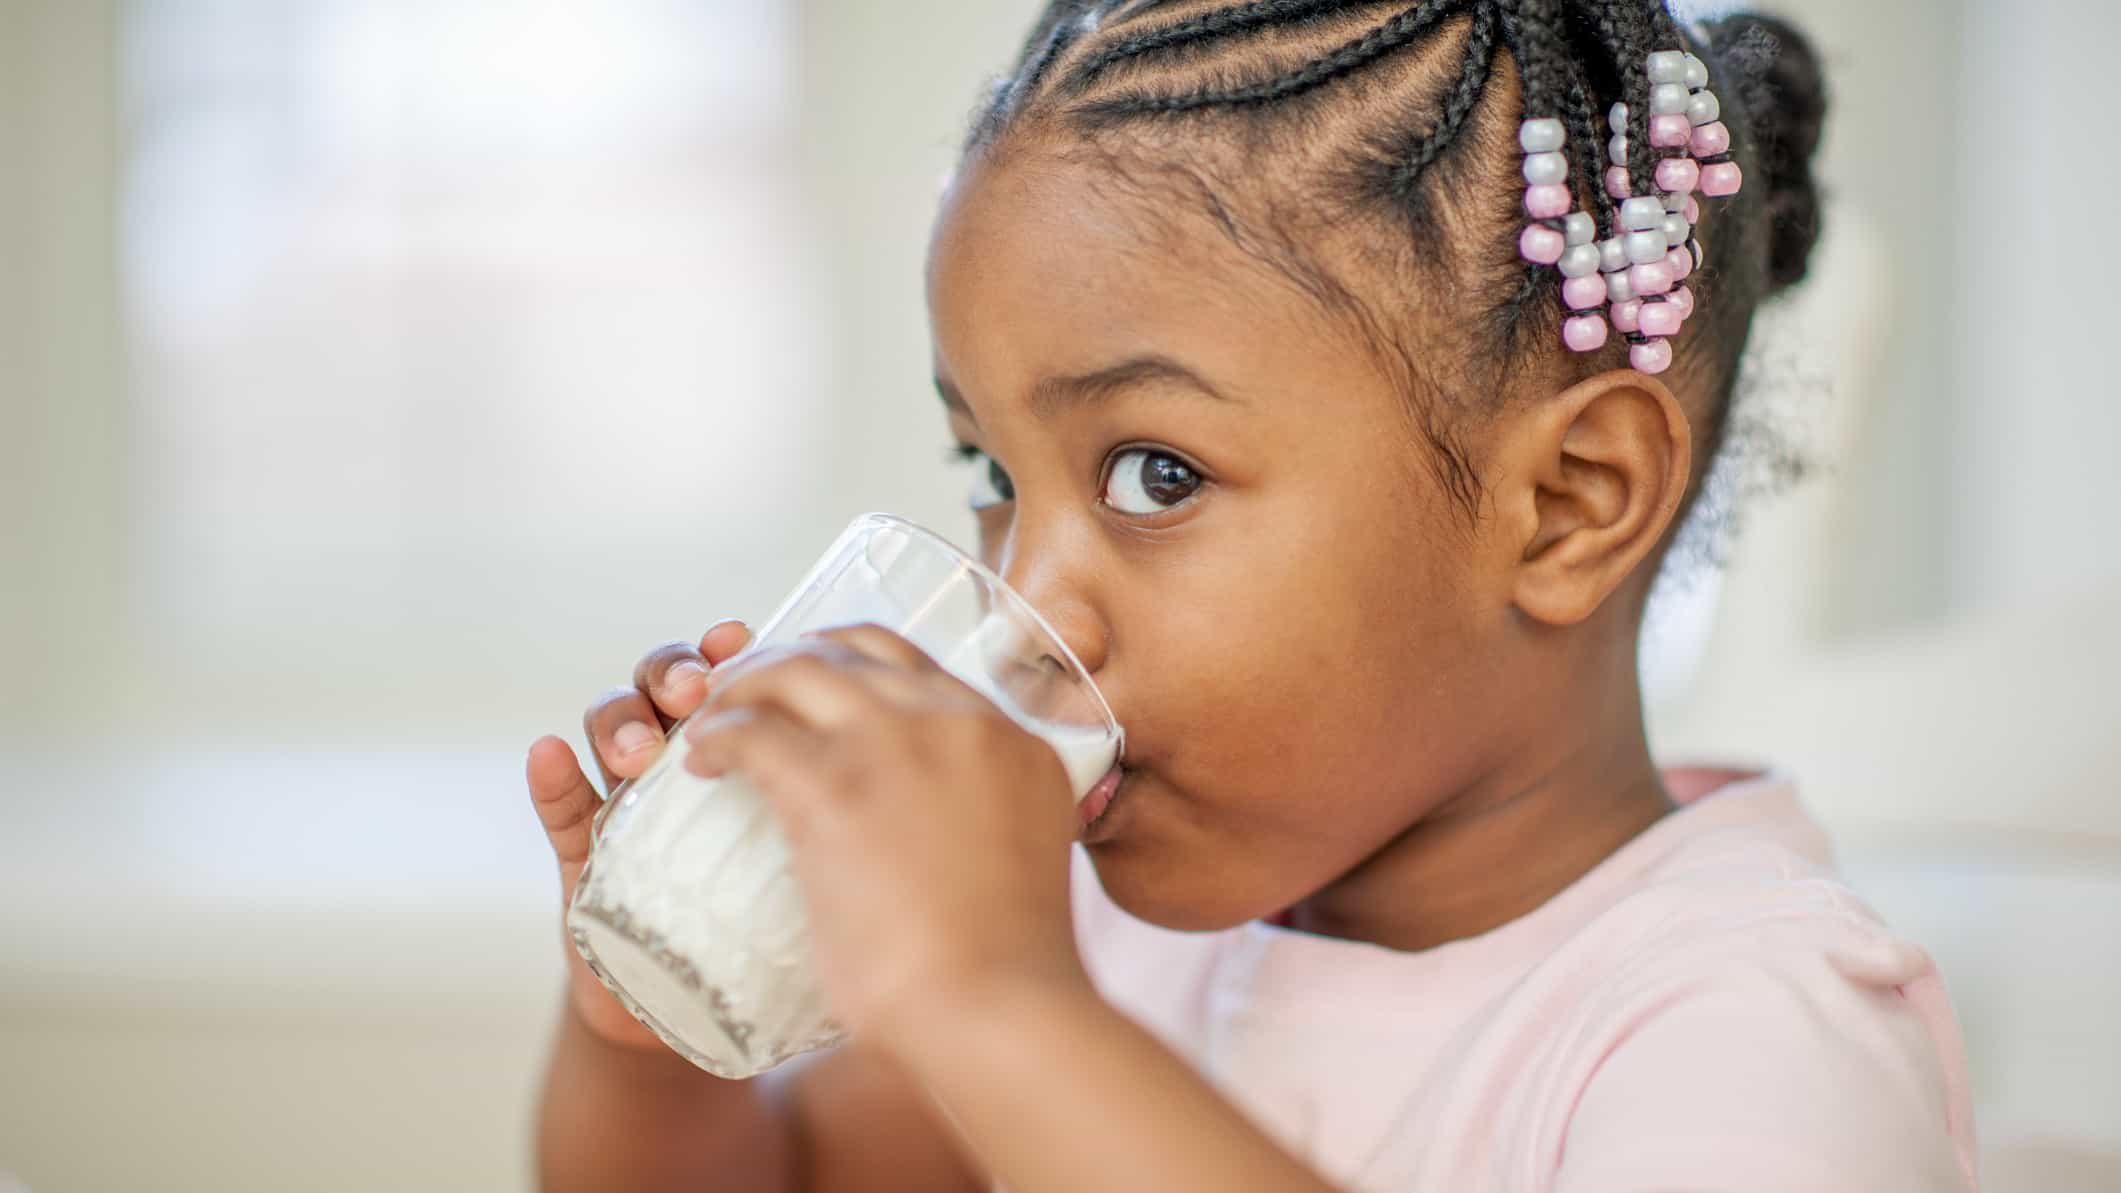 Young girl drinking glass of milk